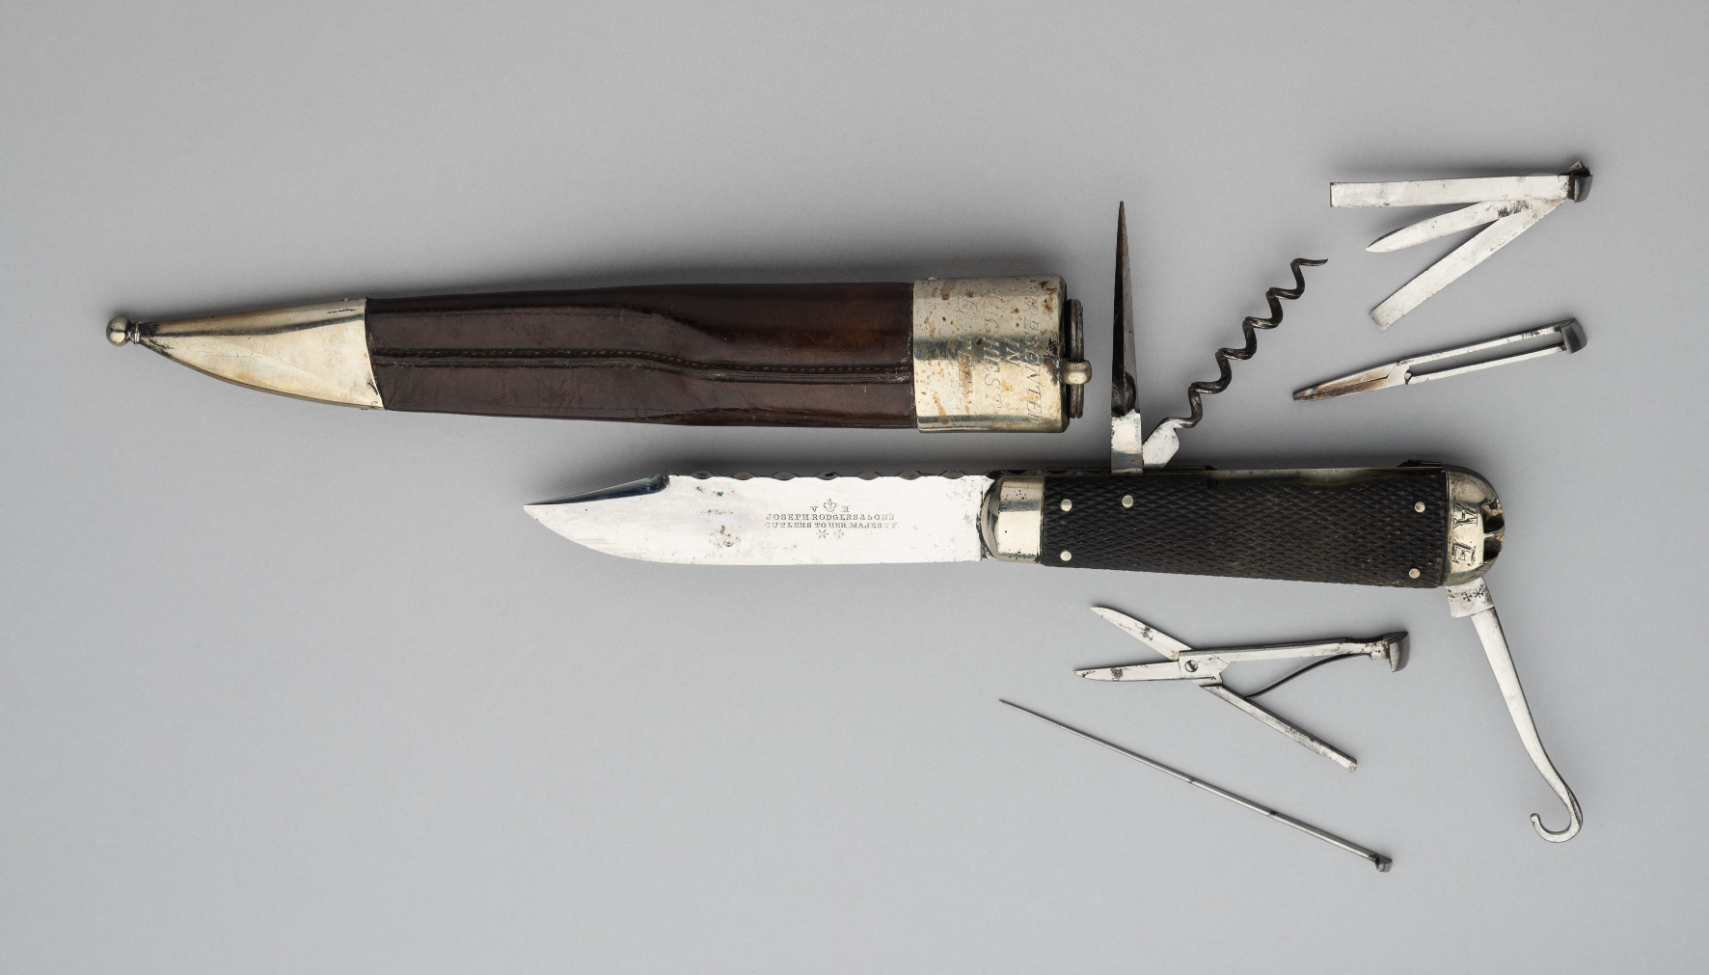 A FIXED-BLADE CAMPAIGN KNIFE, JOSEPH RODGERS & SONS, CUTLERS TO HER MAJESTY, LATE 19TH CENTURY,